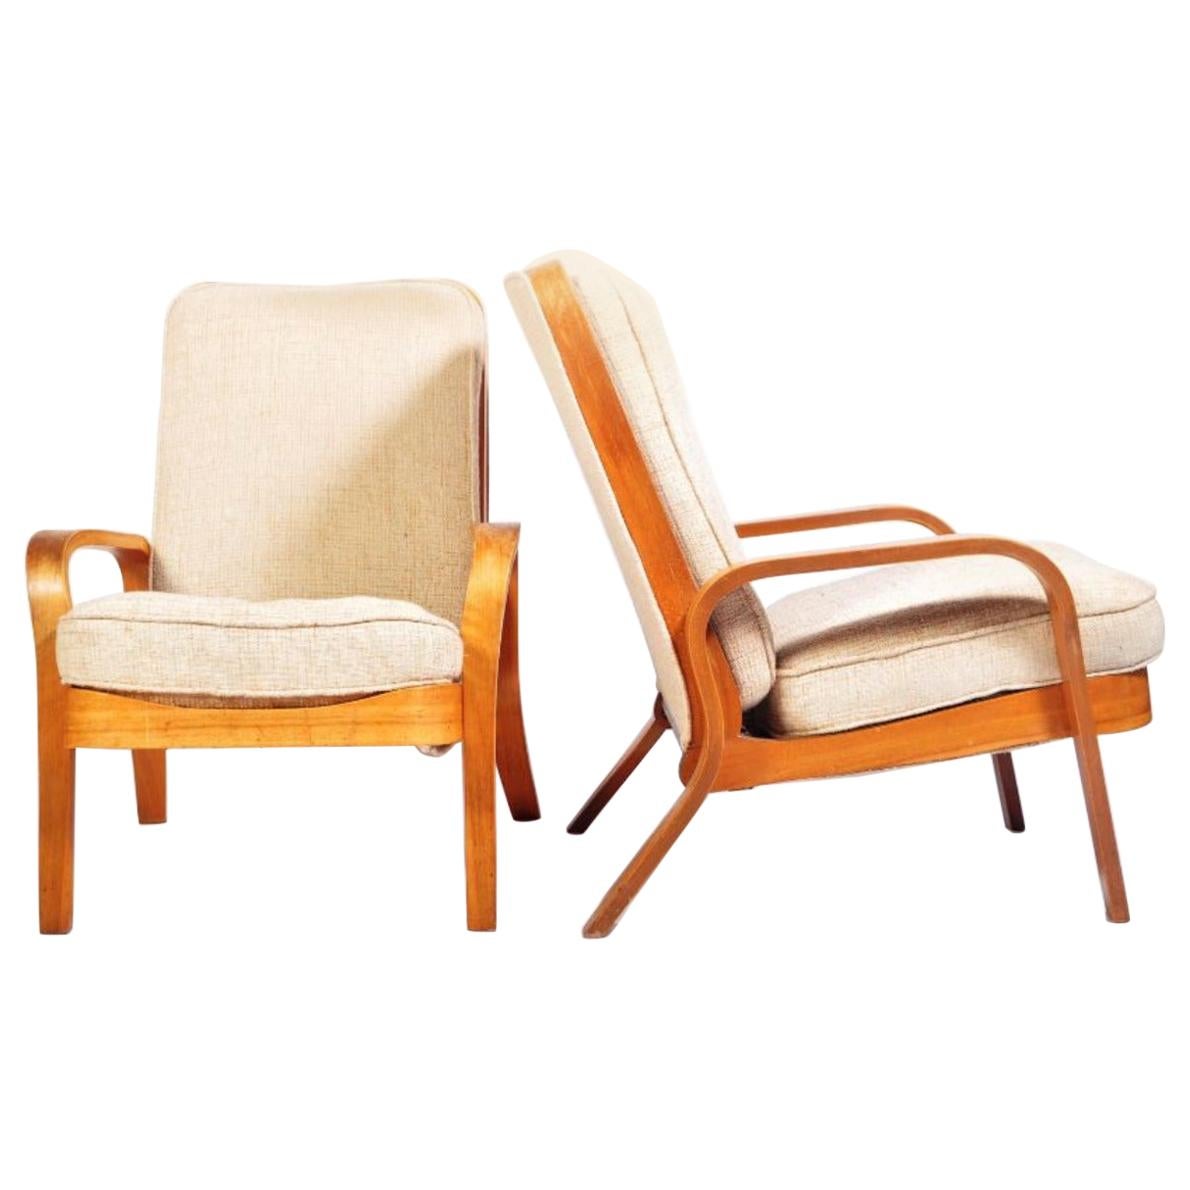 Pair of Chairs for the Modern Home For Sale